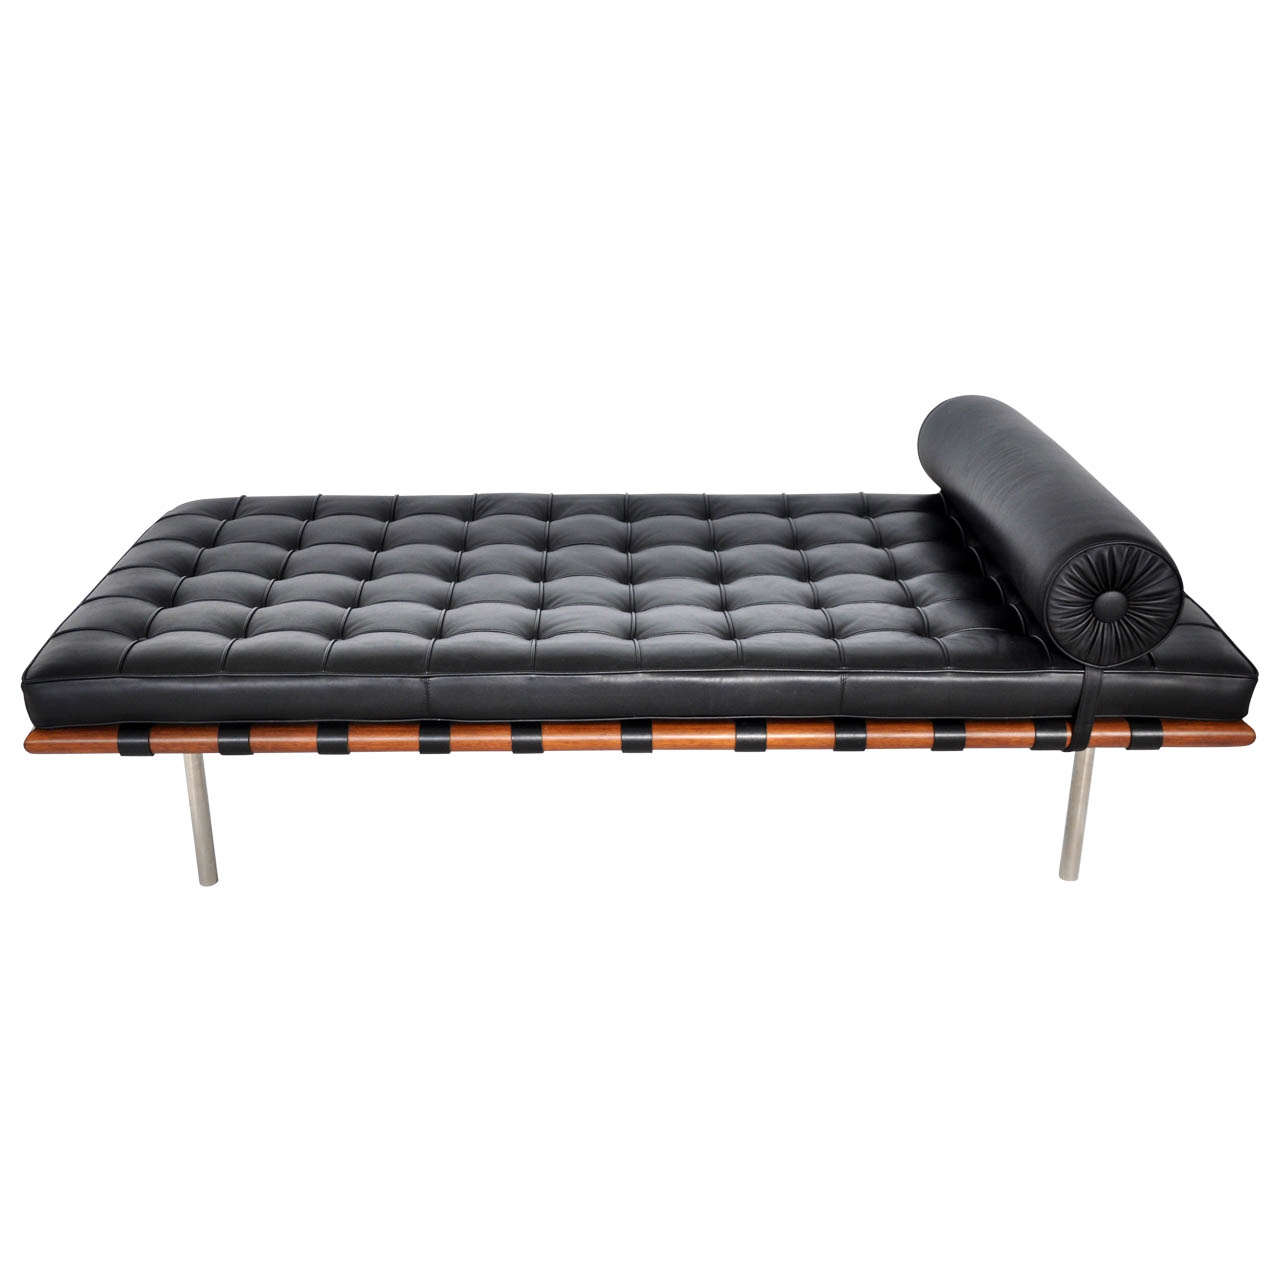 Ludwig Mies van der Rohe Barcelona Daybed.  Manufactured by Knoll.